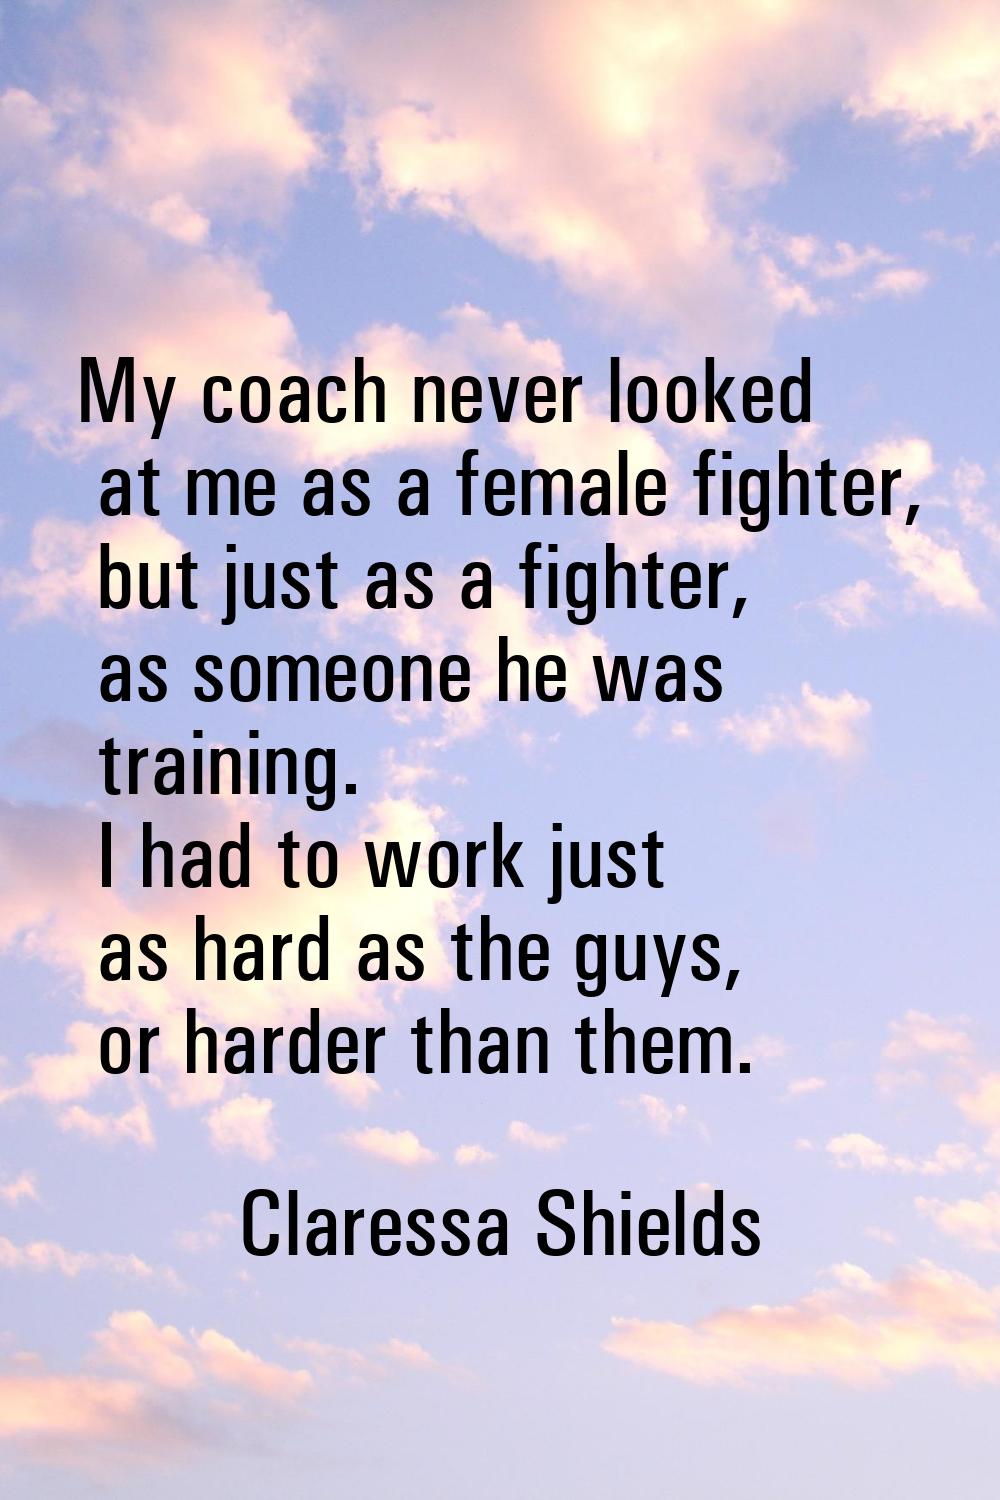 My coach never looked at me as a female fighter, but just as a fighter, as someone he was training.